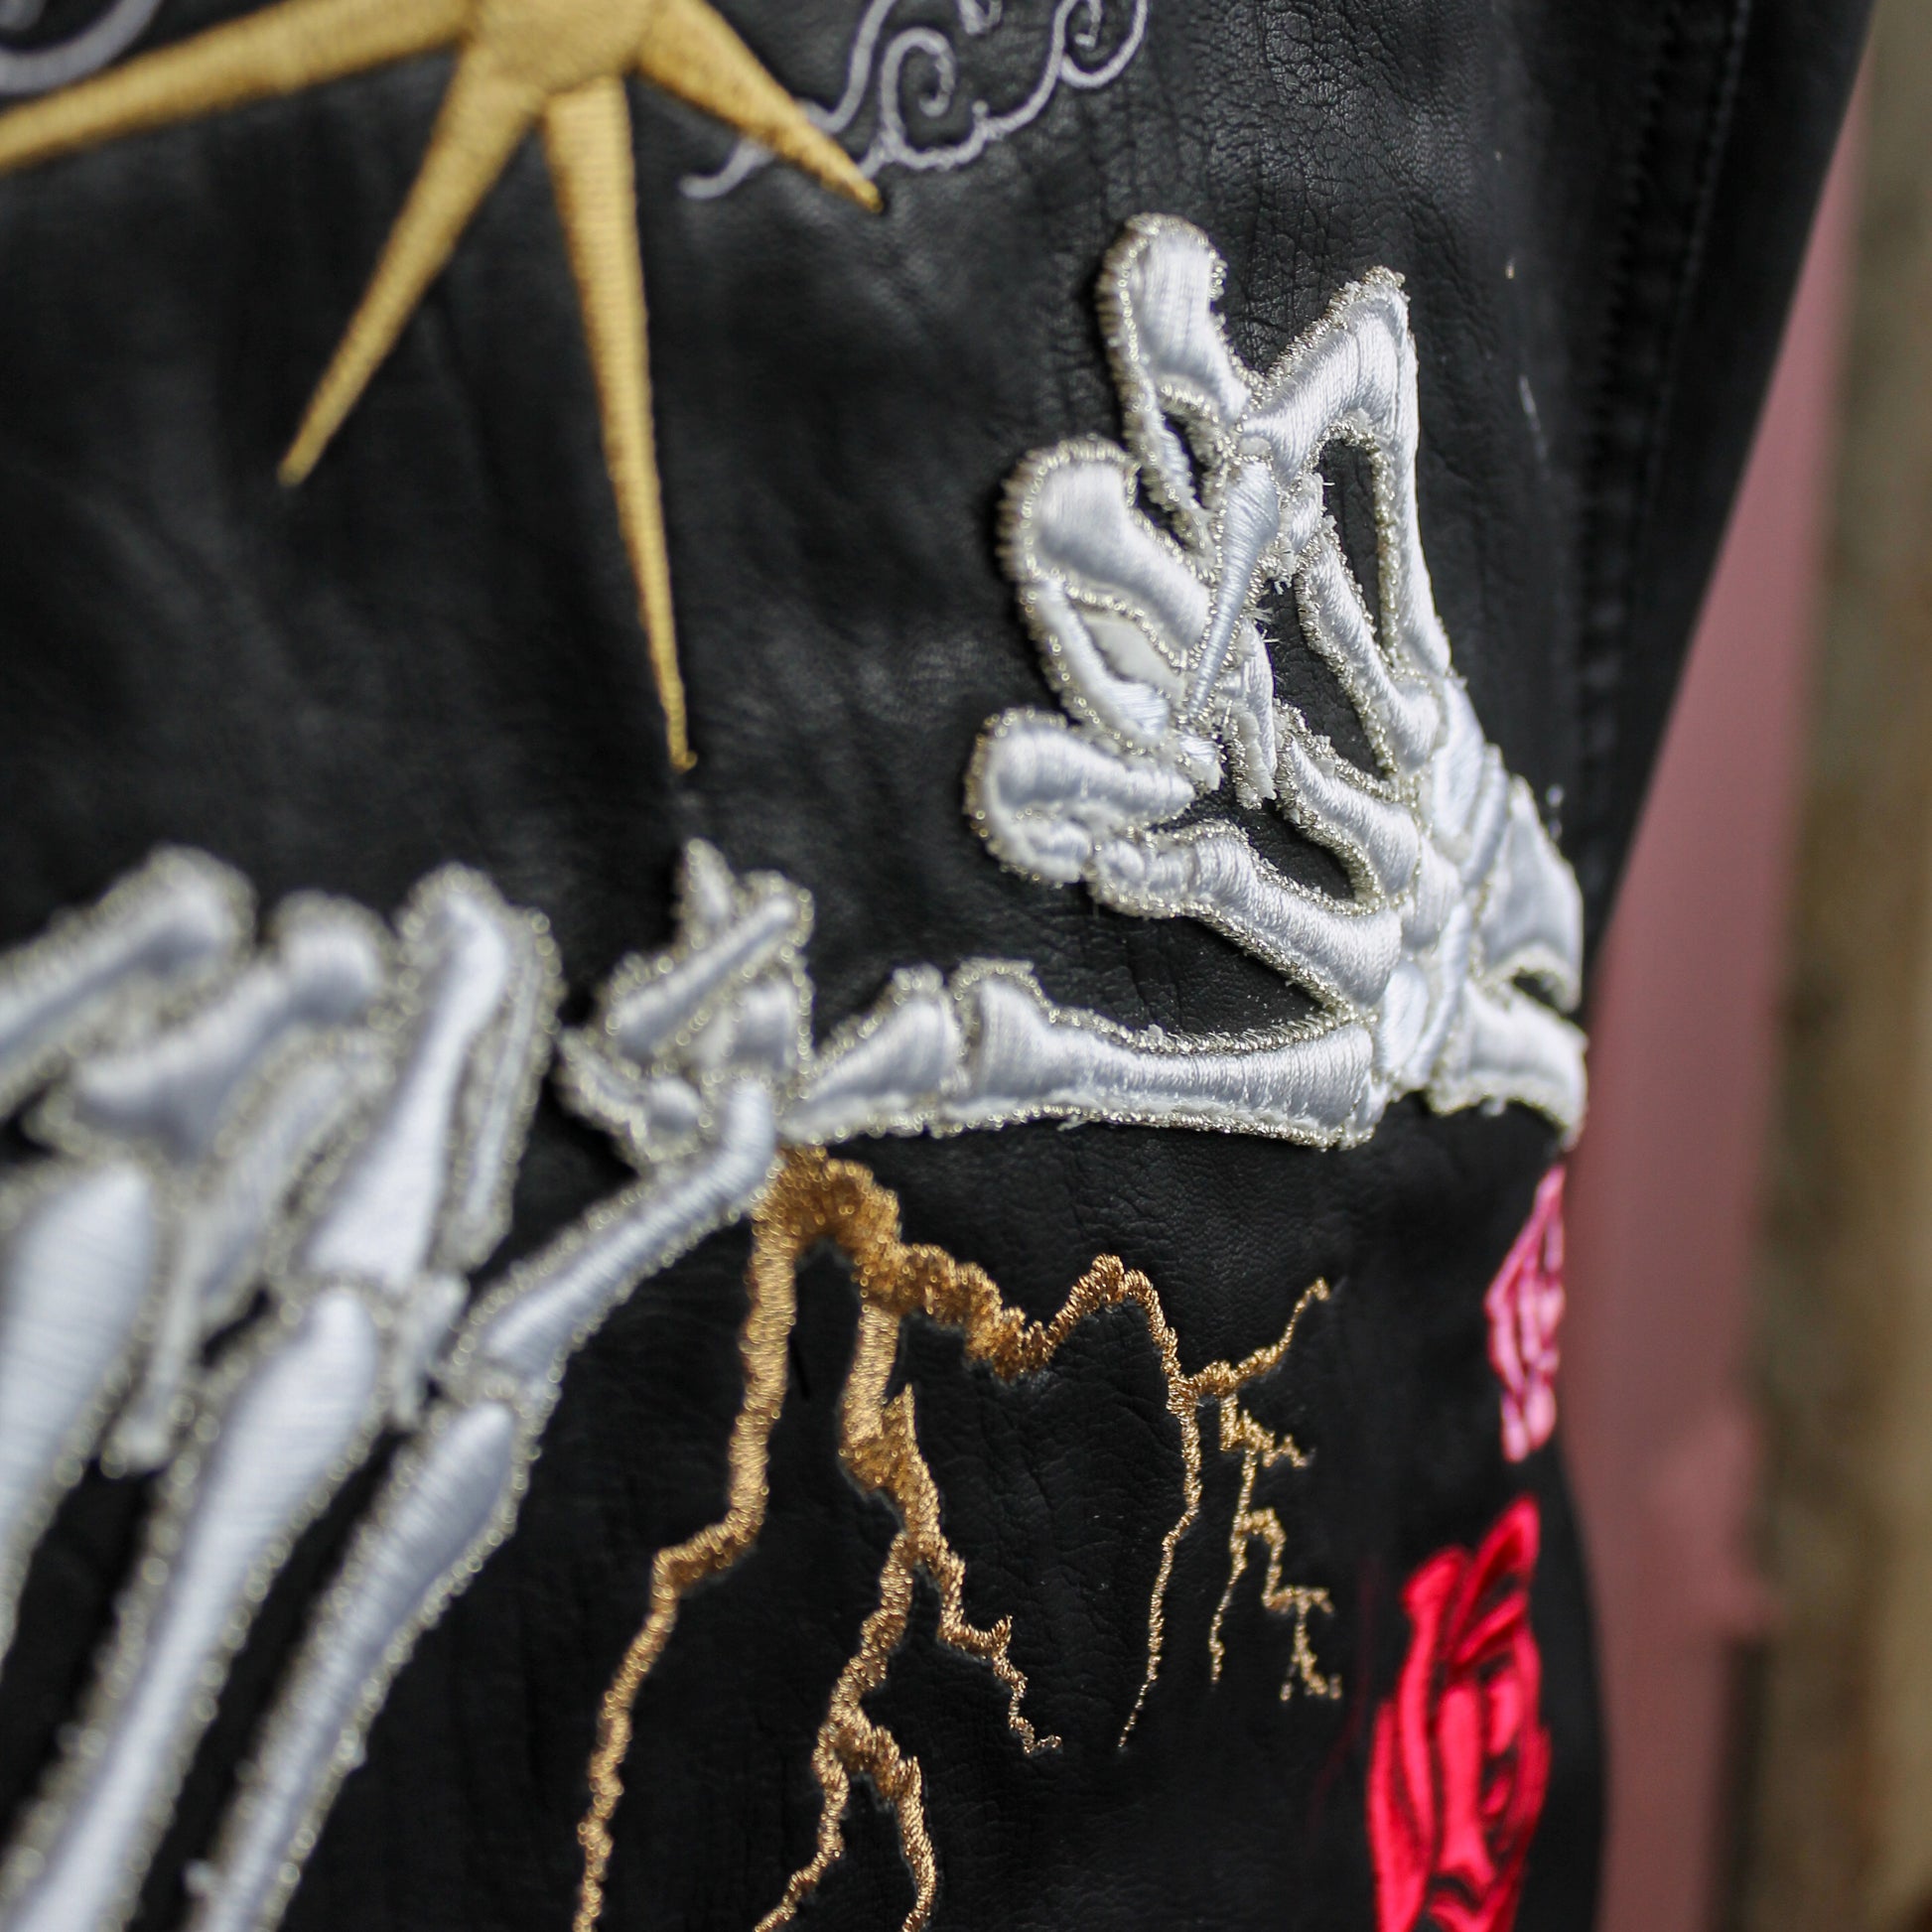 Floral celestial-themed leather jacket for the bride-to-be